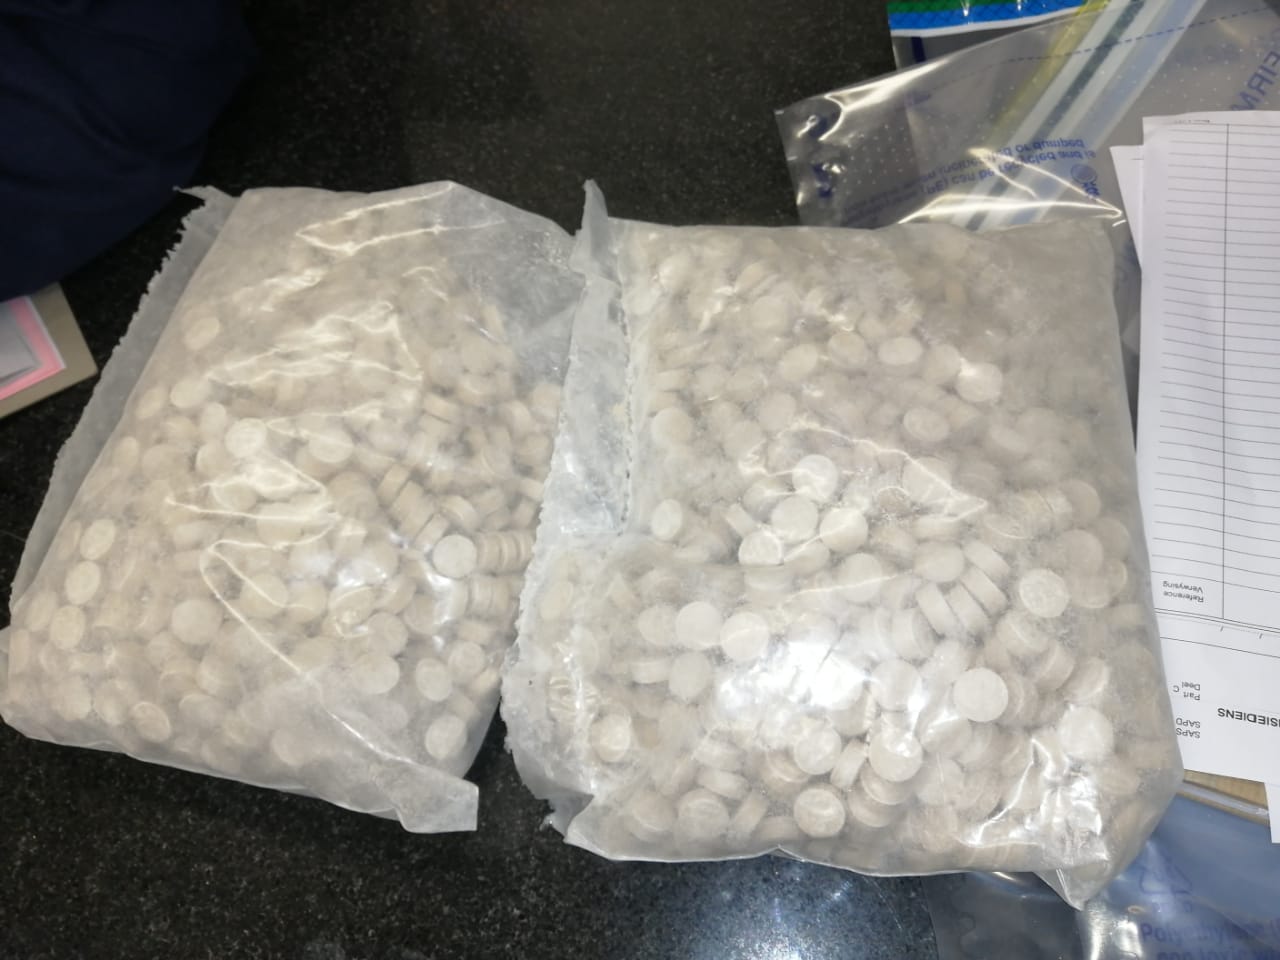 Two suspects arrested on charges of dealing in drugs in Chatsworth, Malmesbury